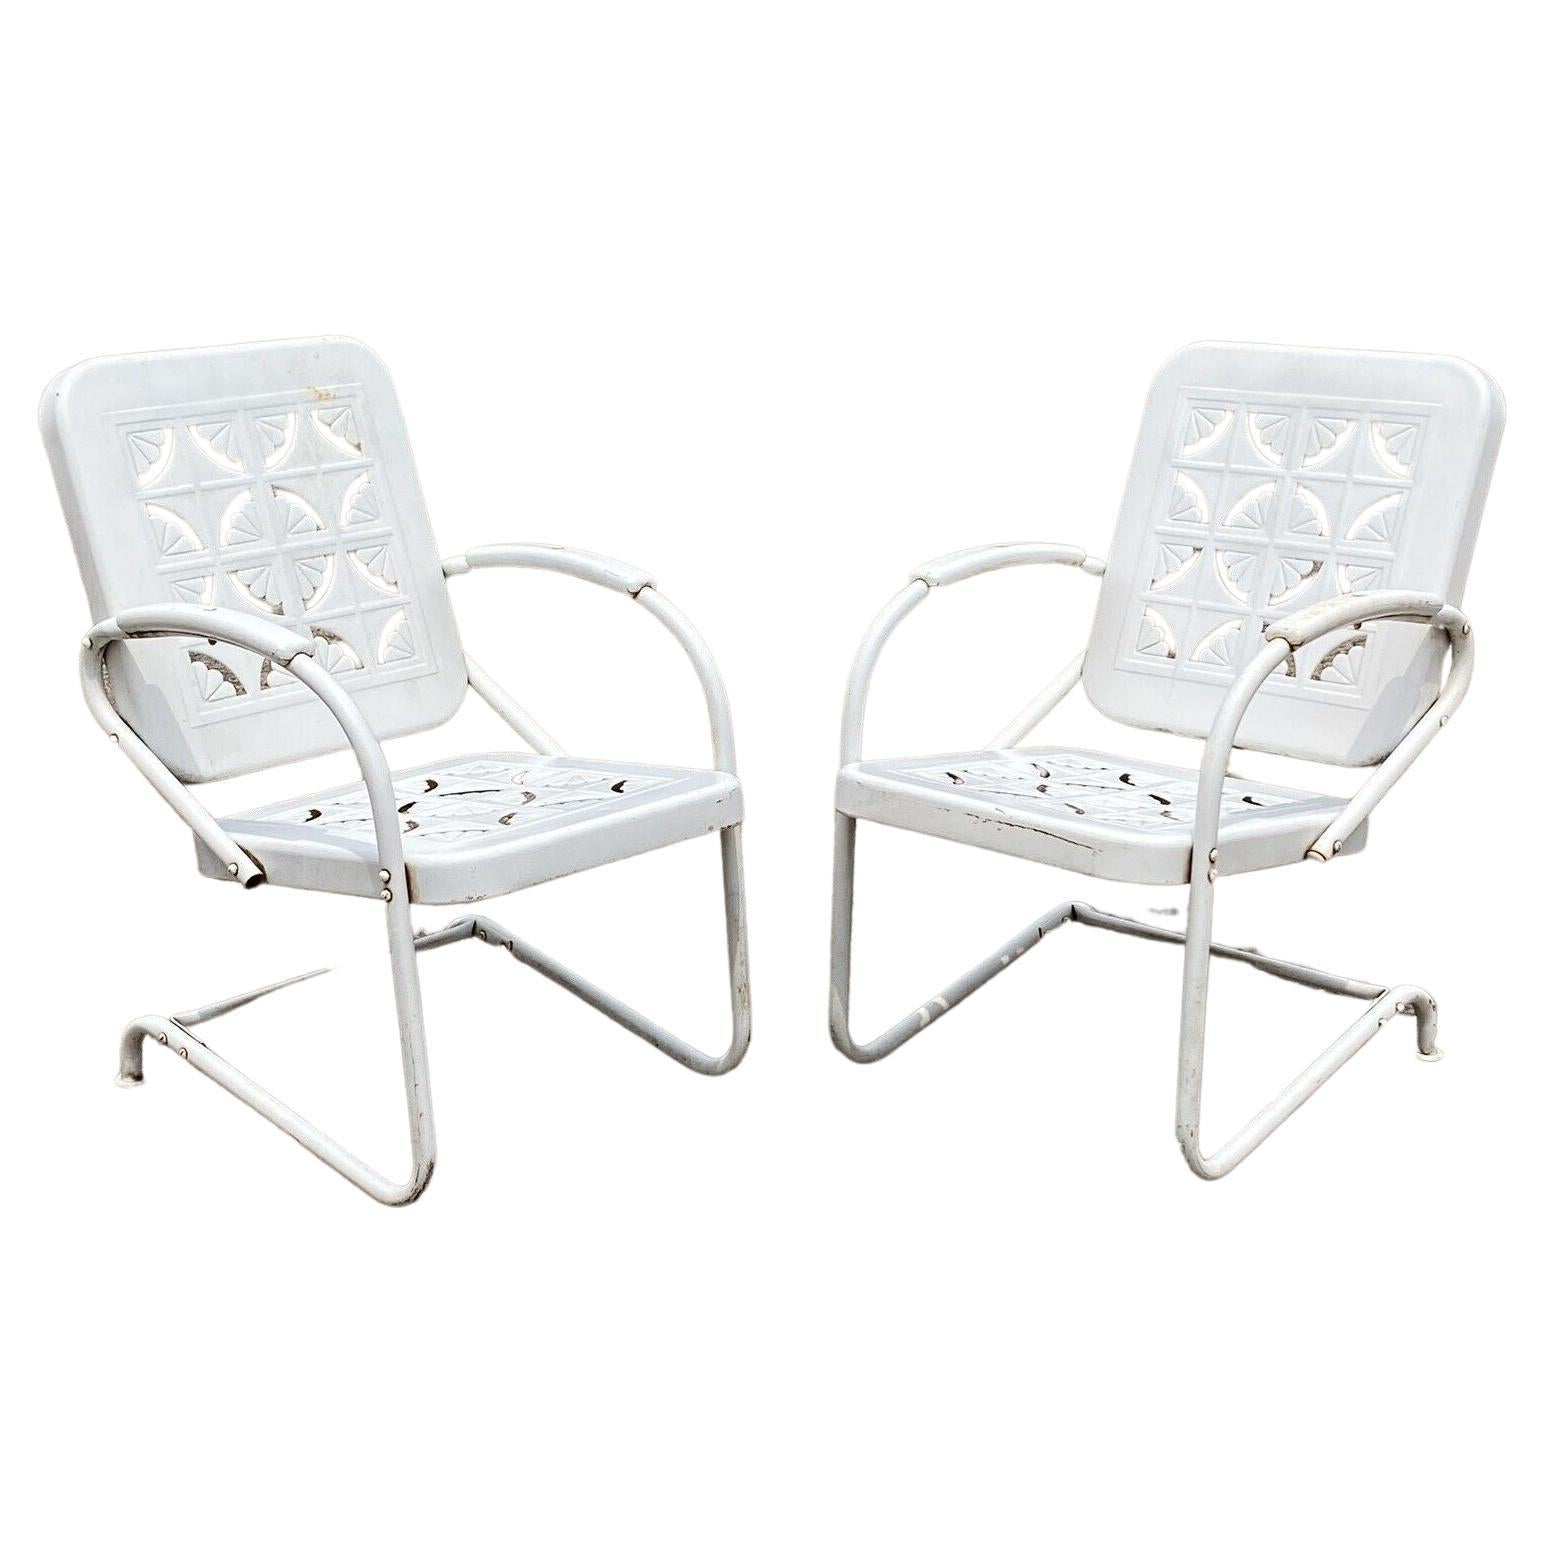 Vintage Starburst Pie Crest Metal Outdoor Patio Springer Lounge Chairs - a Pair For Sale